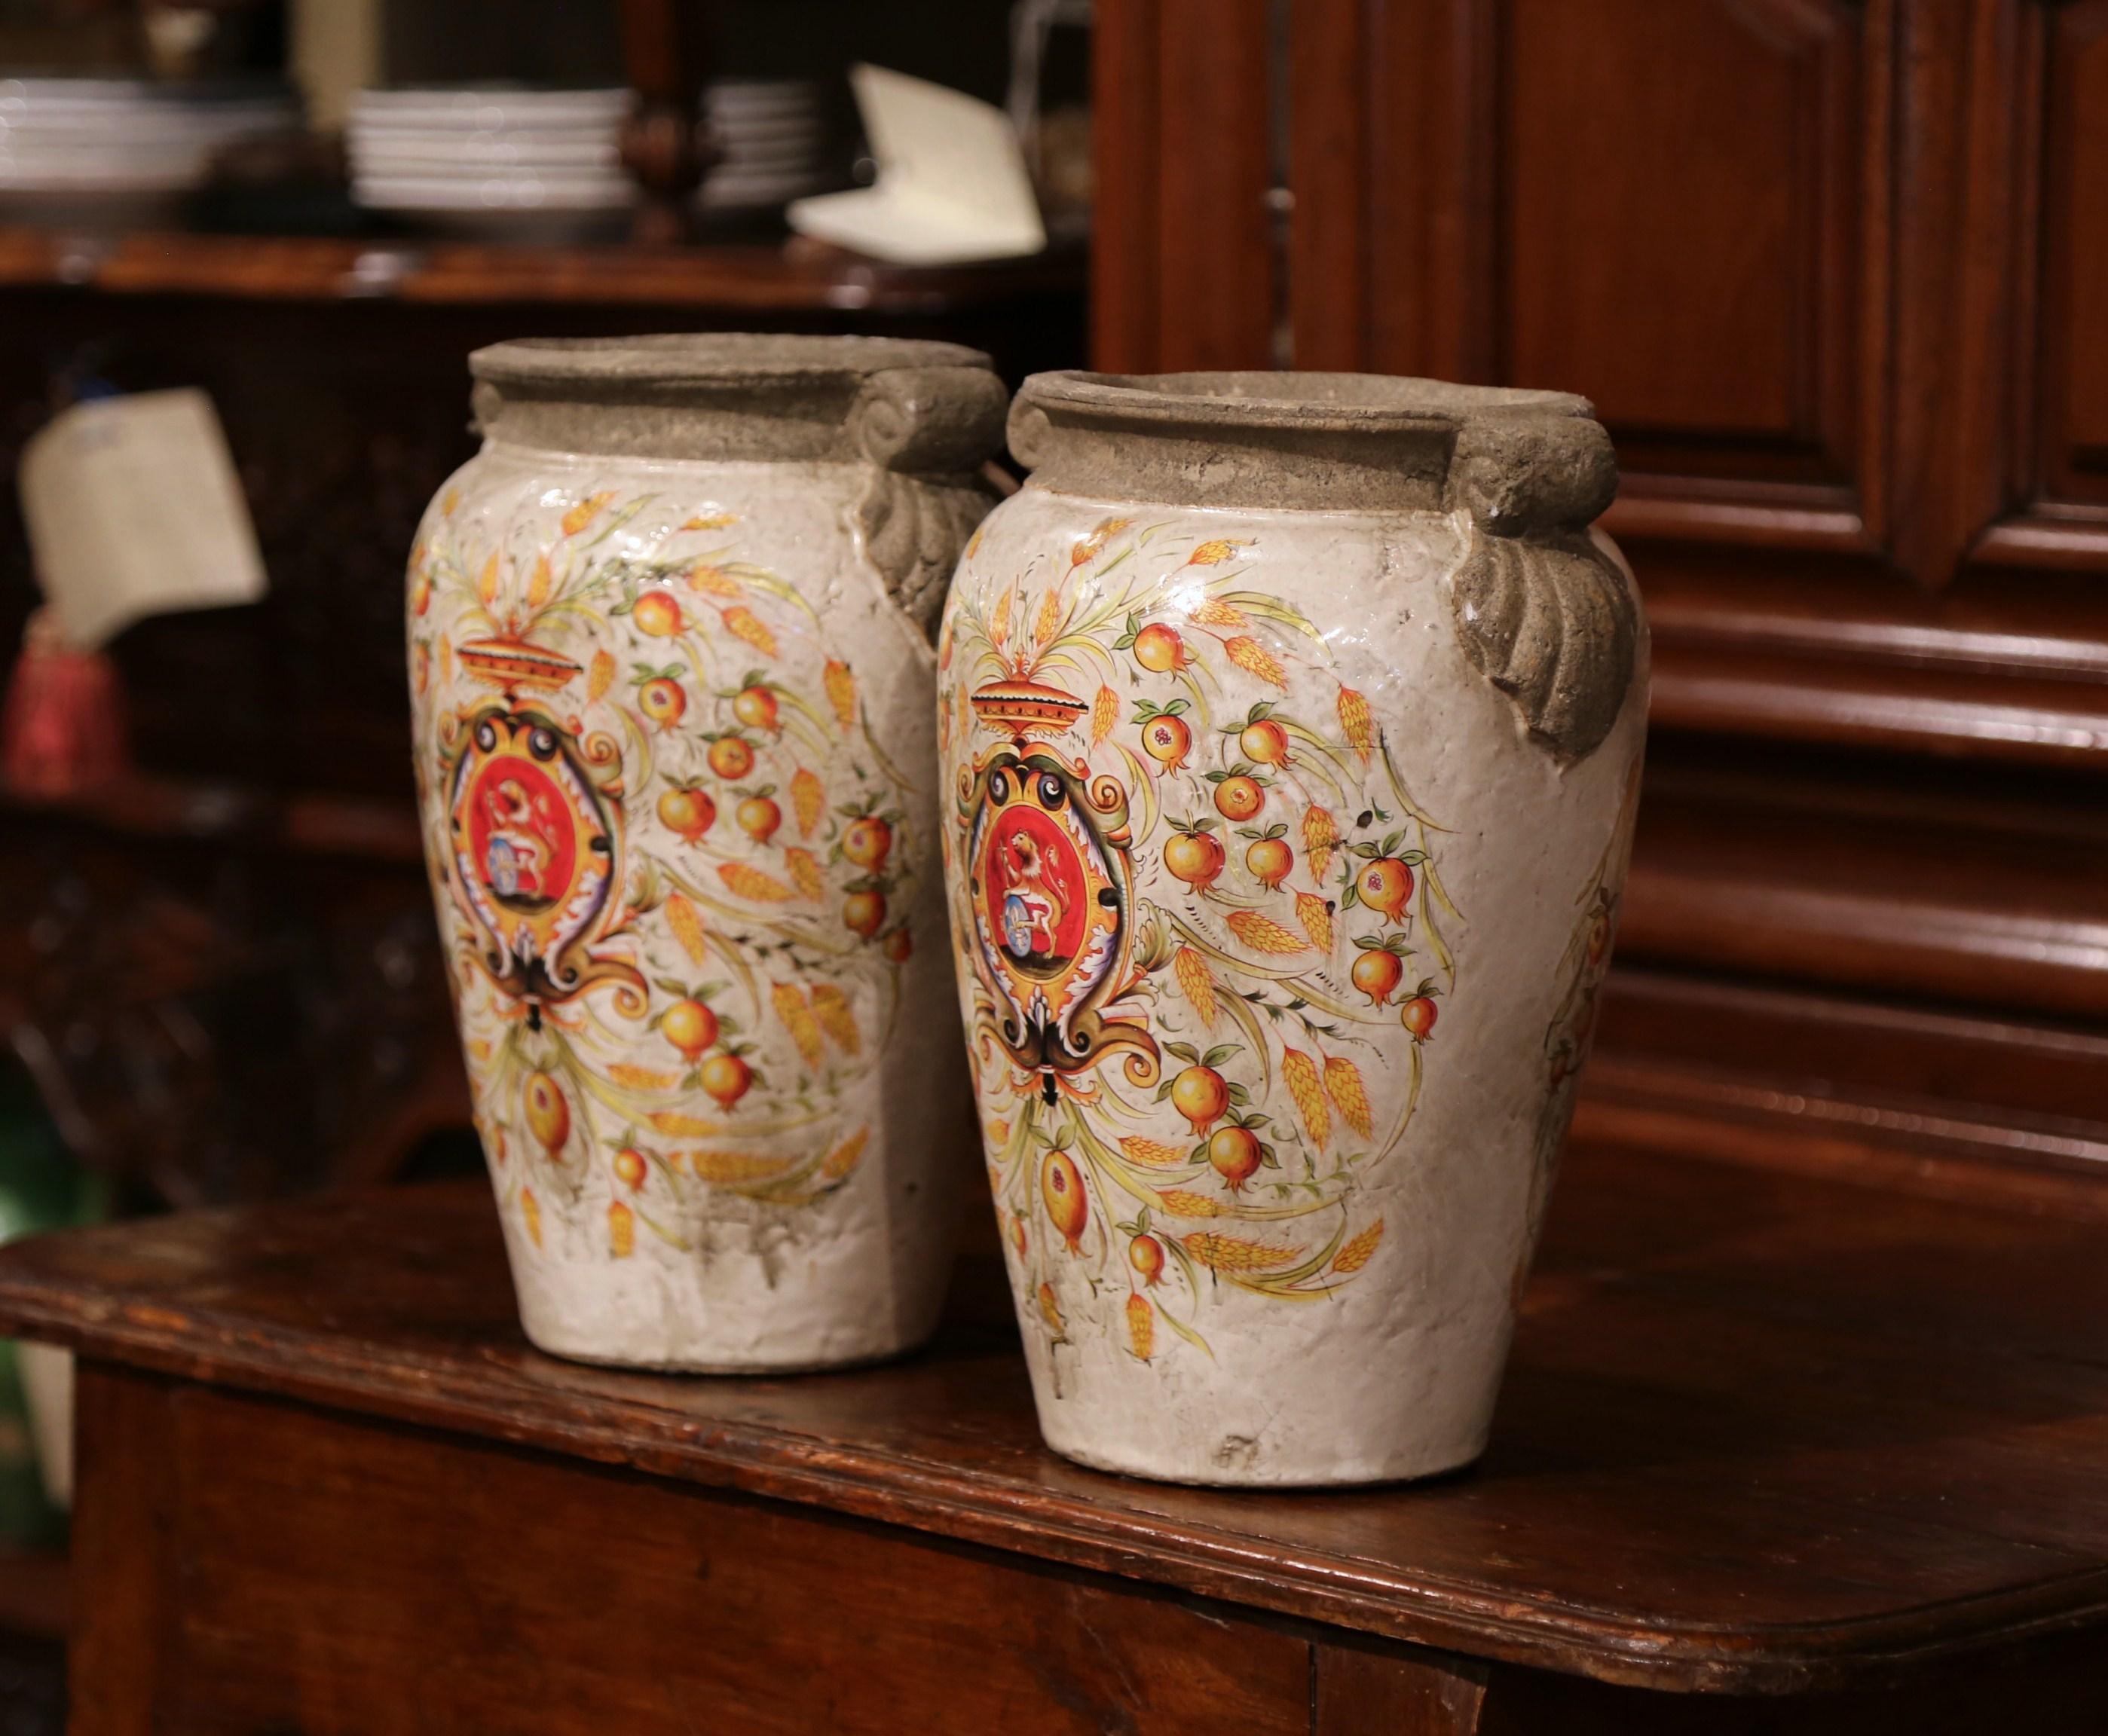 Decorate your mantel with this elegant, colorful pair of vases from Italy. The large, decorative vases are round in shape with small handles on both sides. The ceramic pots feature hand-painted colorful decor on both sides, which includes a crest,